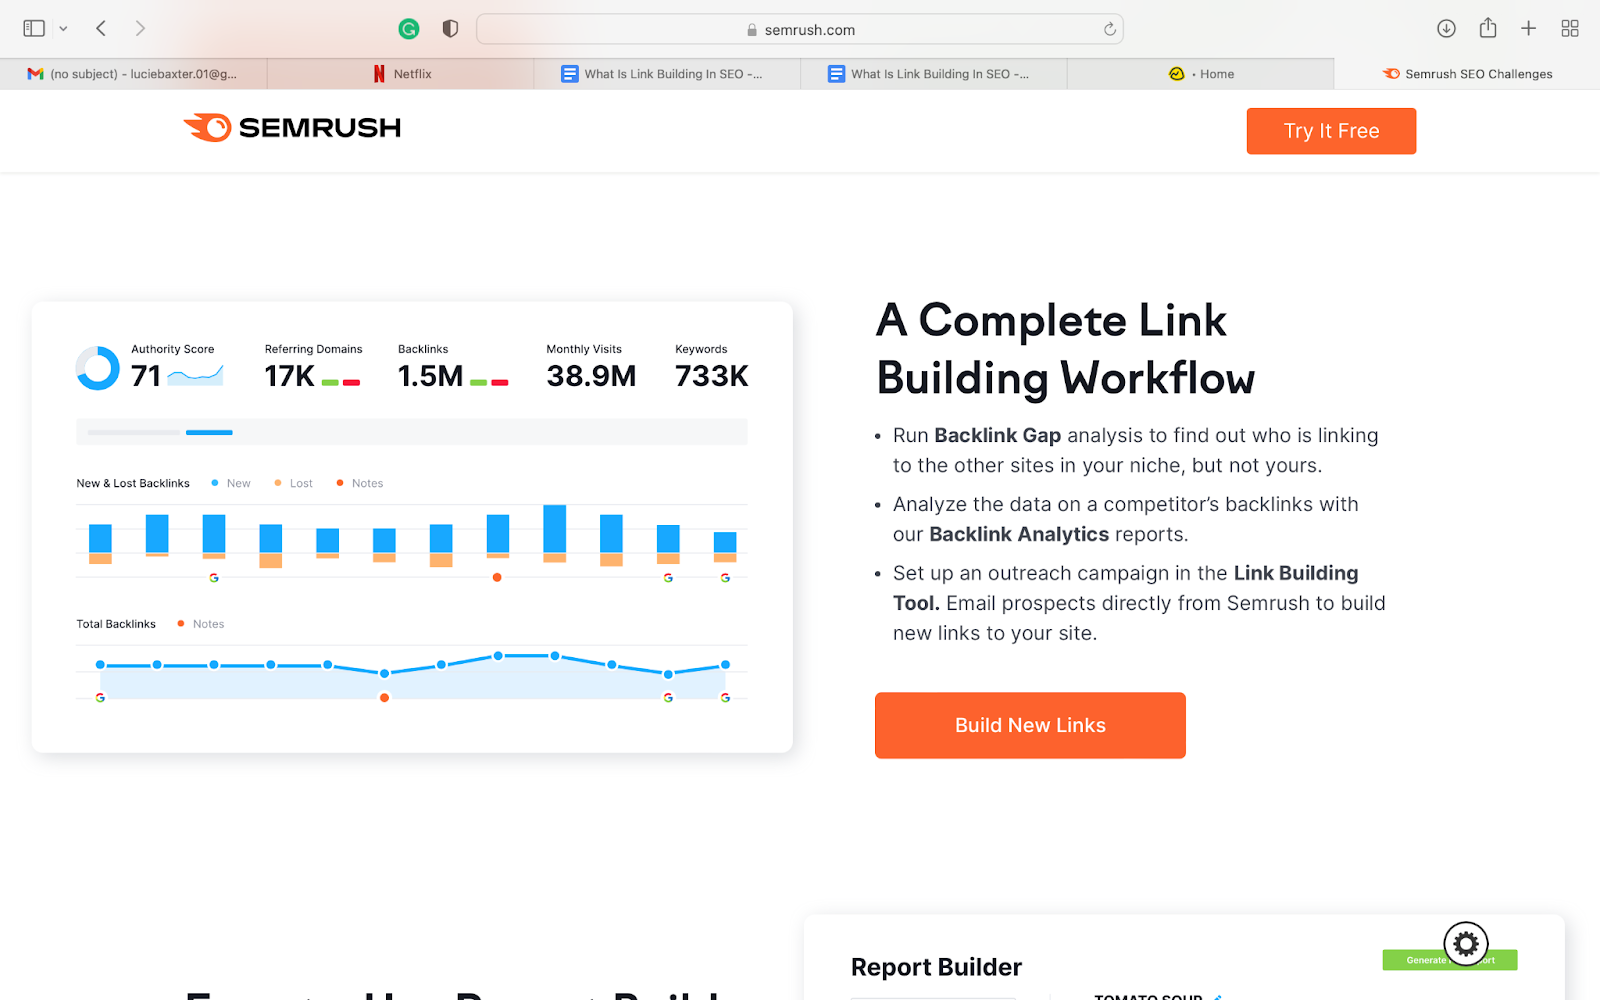 A screen cap from Semrush's website that shows what the brand offers in terms of tools. This includes the backlink gap analysis, backlink analytics, and the link building tool.